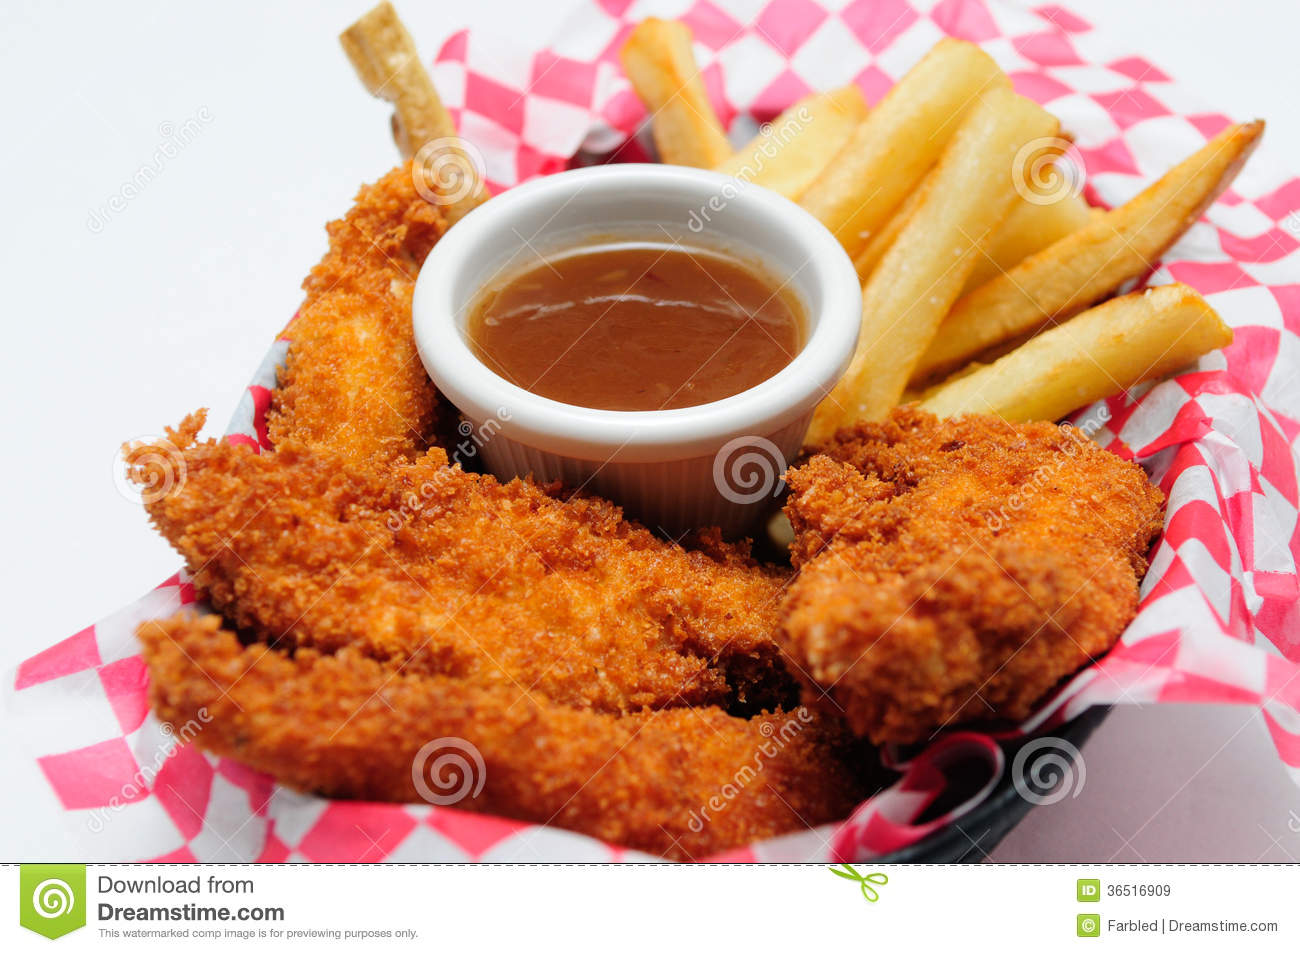     Chicken Strips With French Fries And Dipping Sauce In A Diner Basket